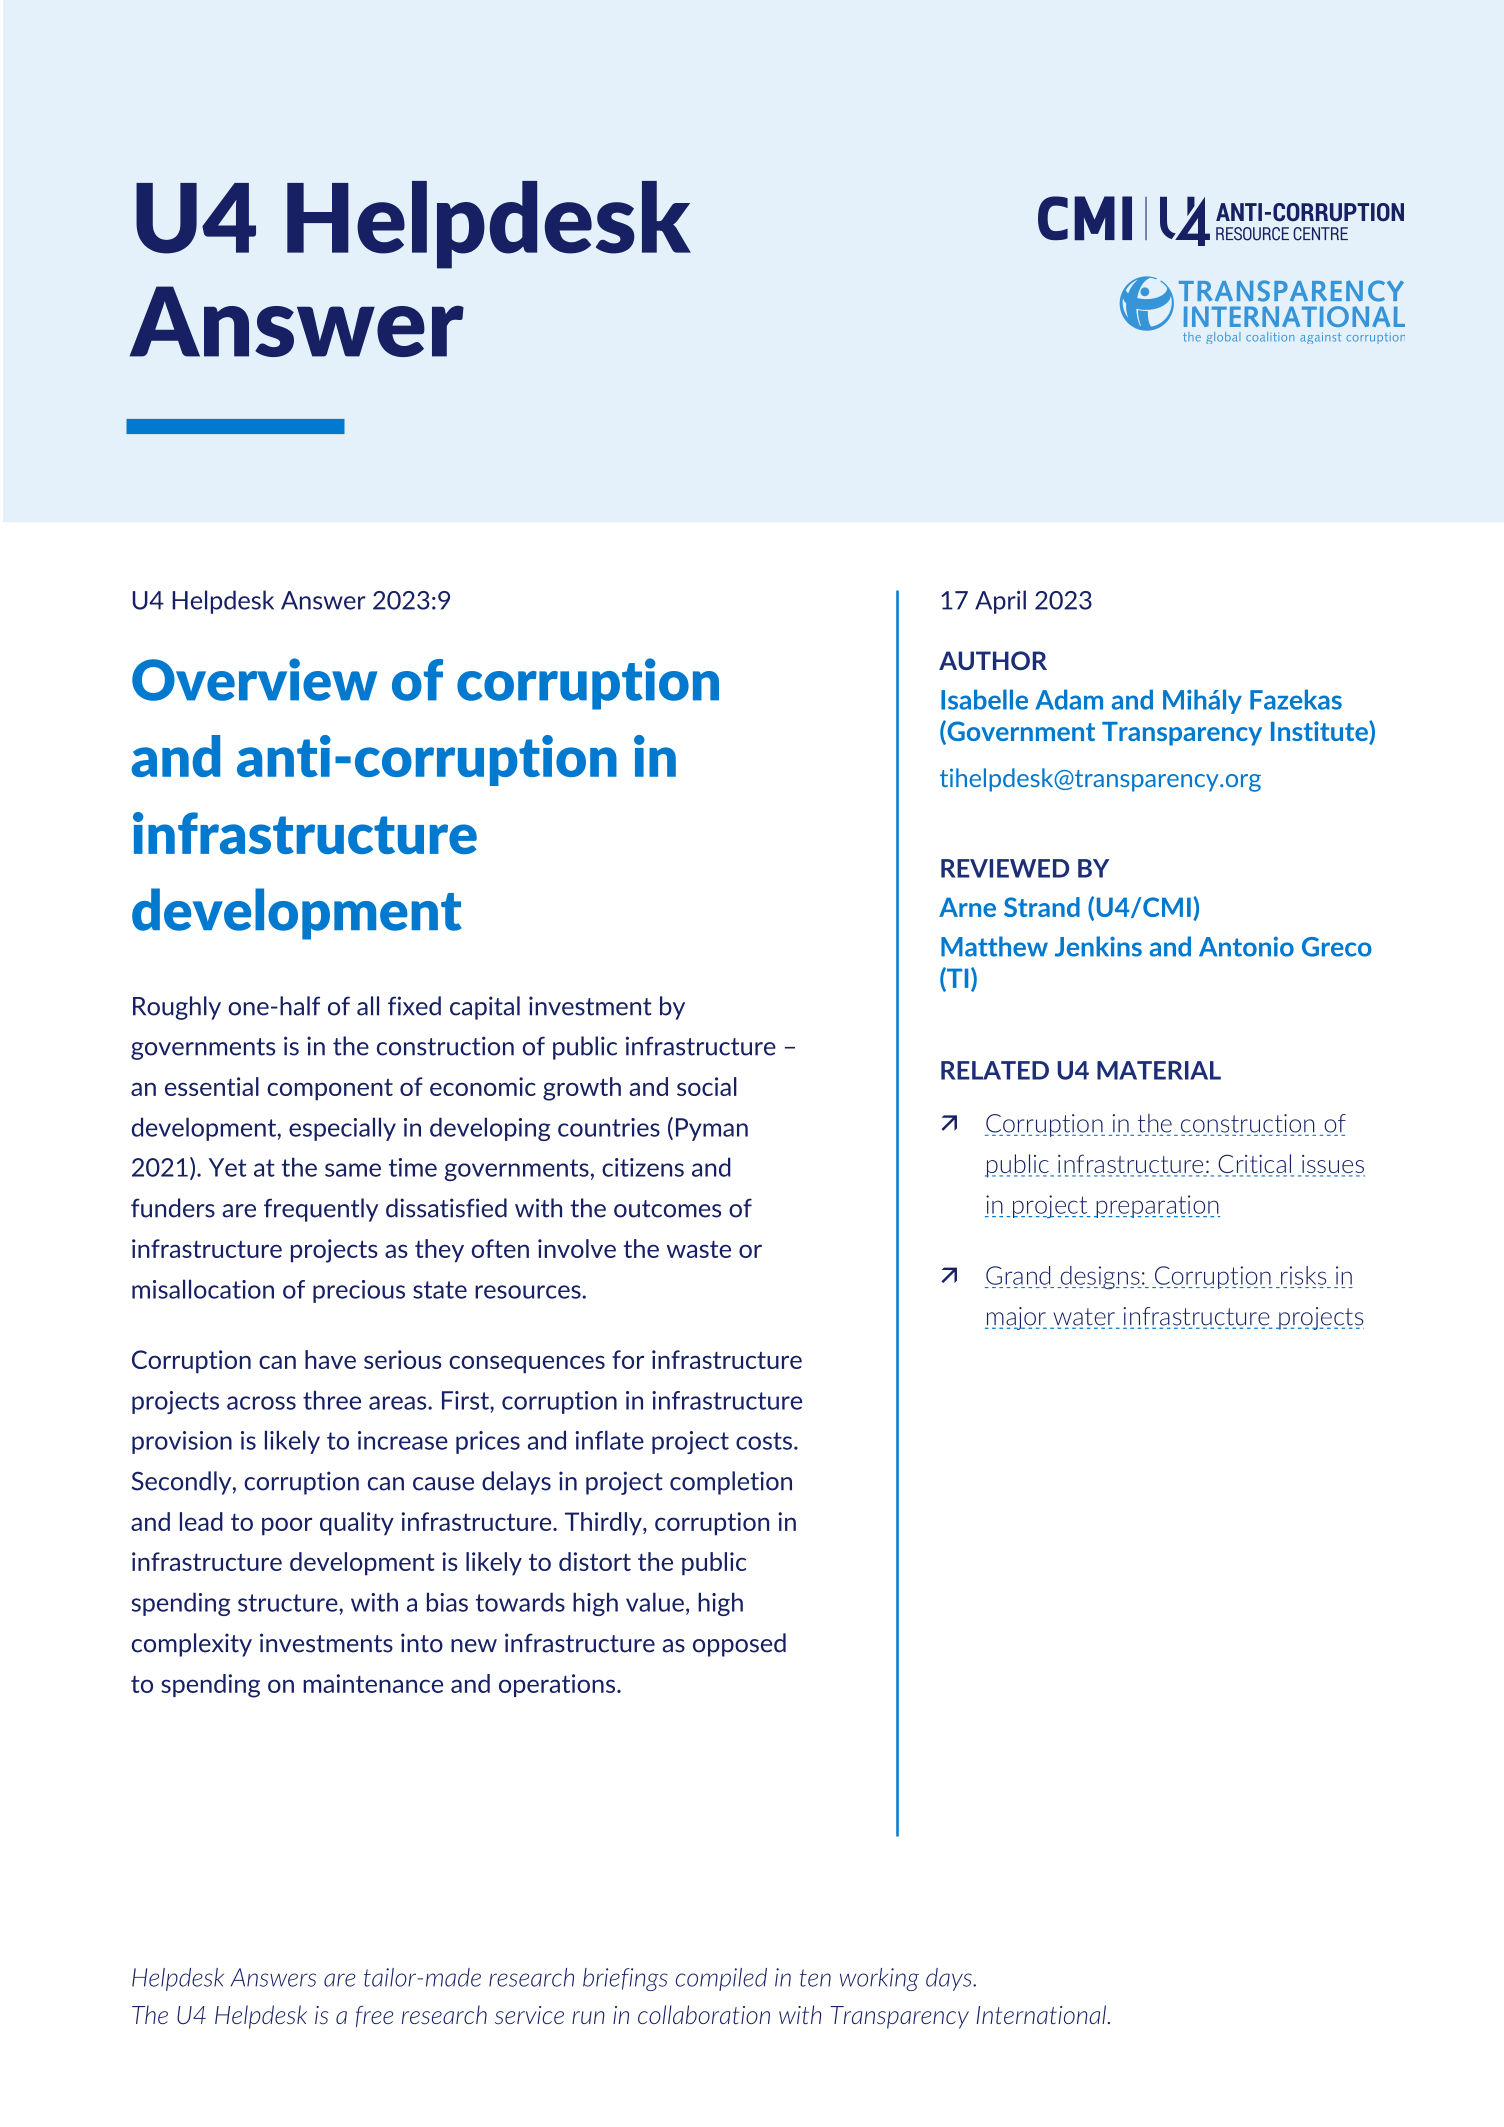 Overview of corruption and anti-corruption in infrastructure development 